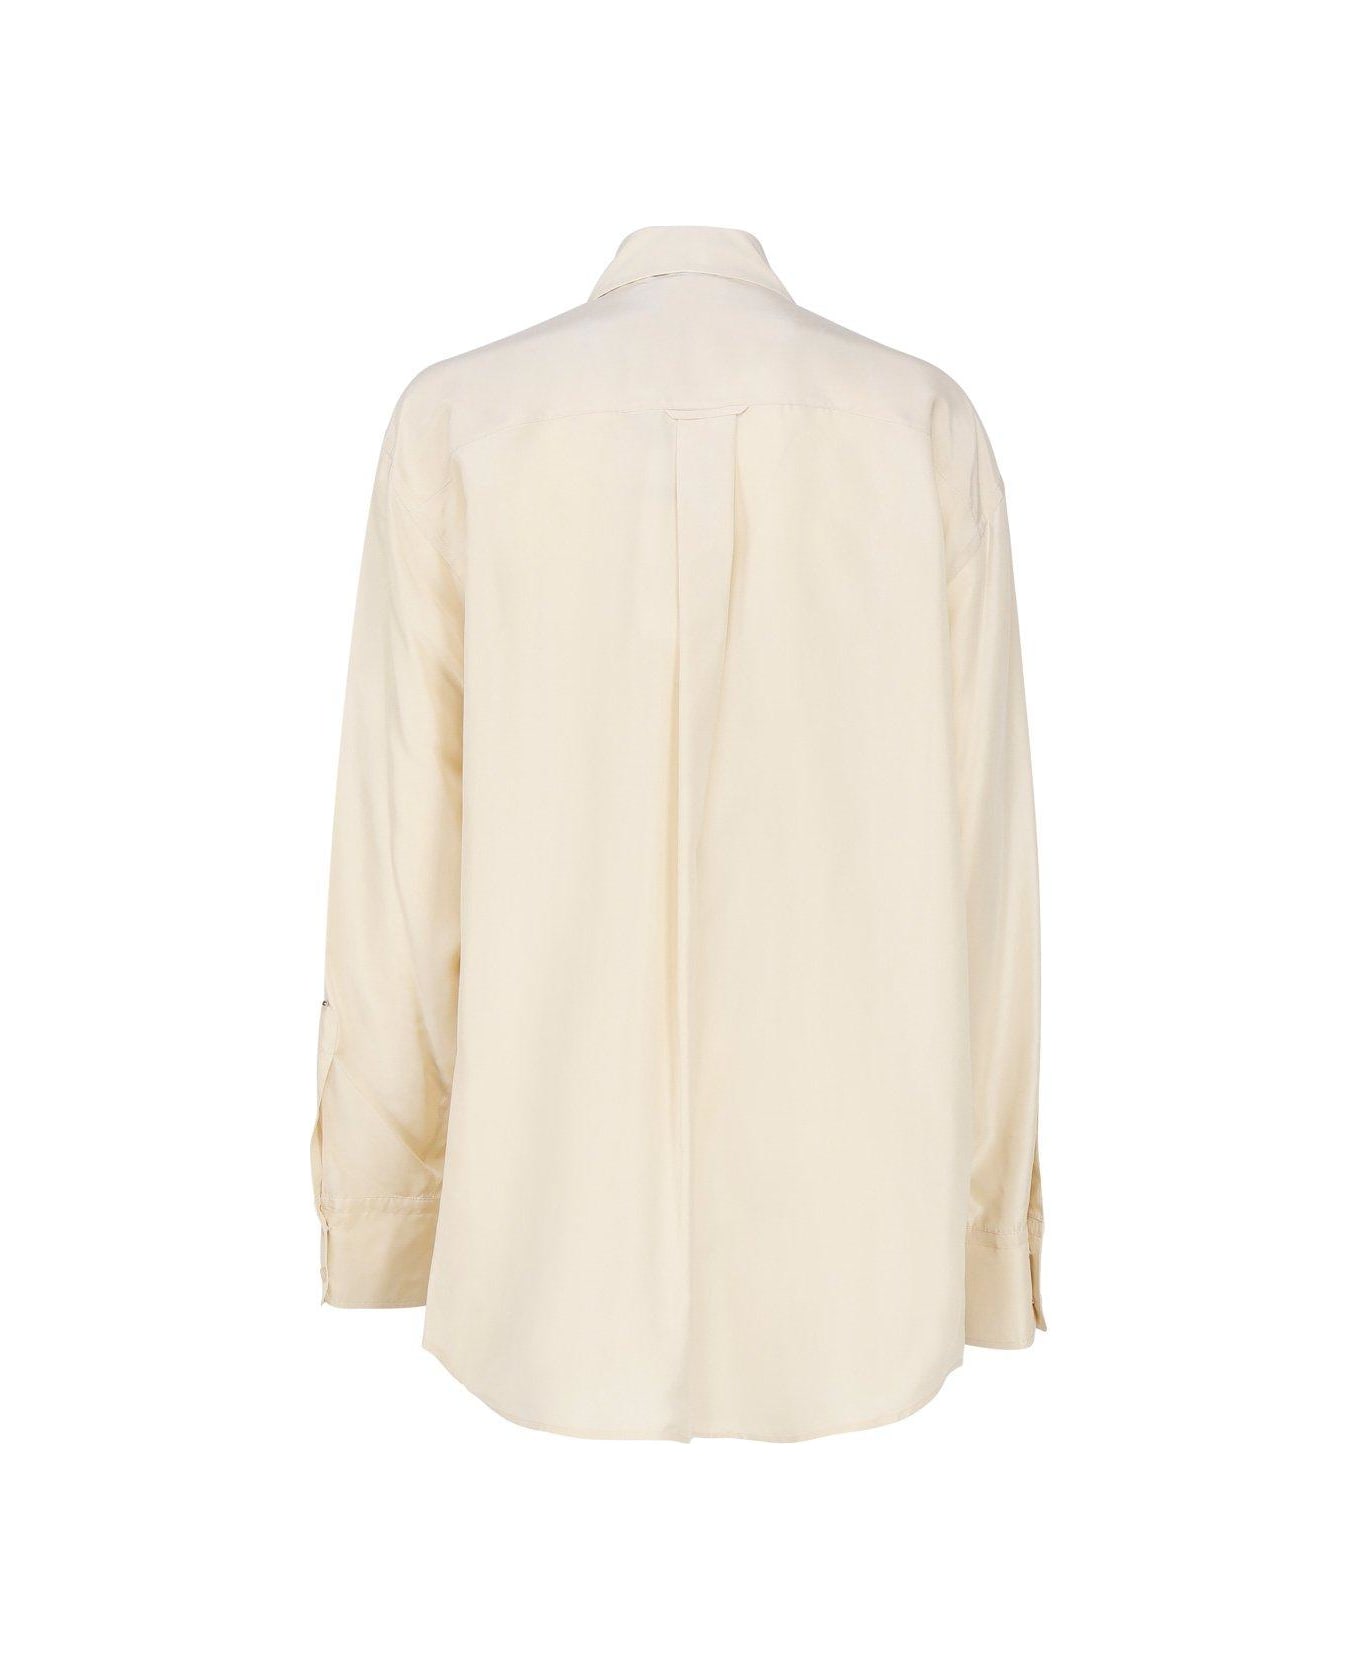 SportMax Buttoned Long-sleeved Shirt - Ivory シャツ